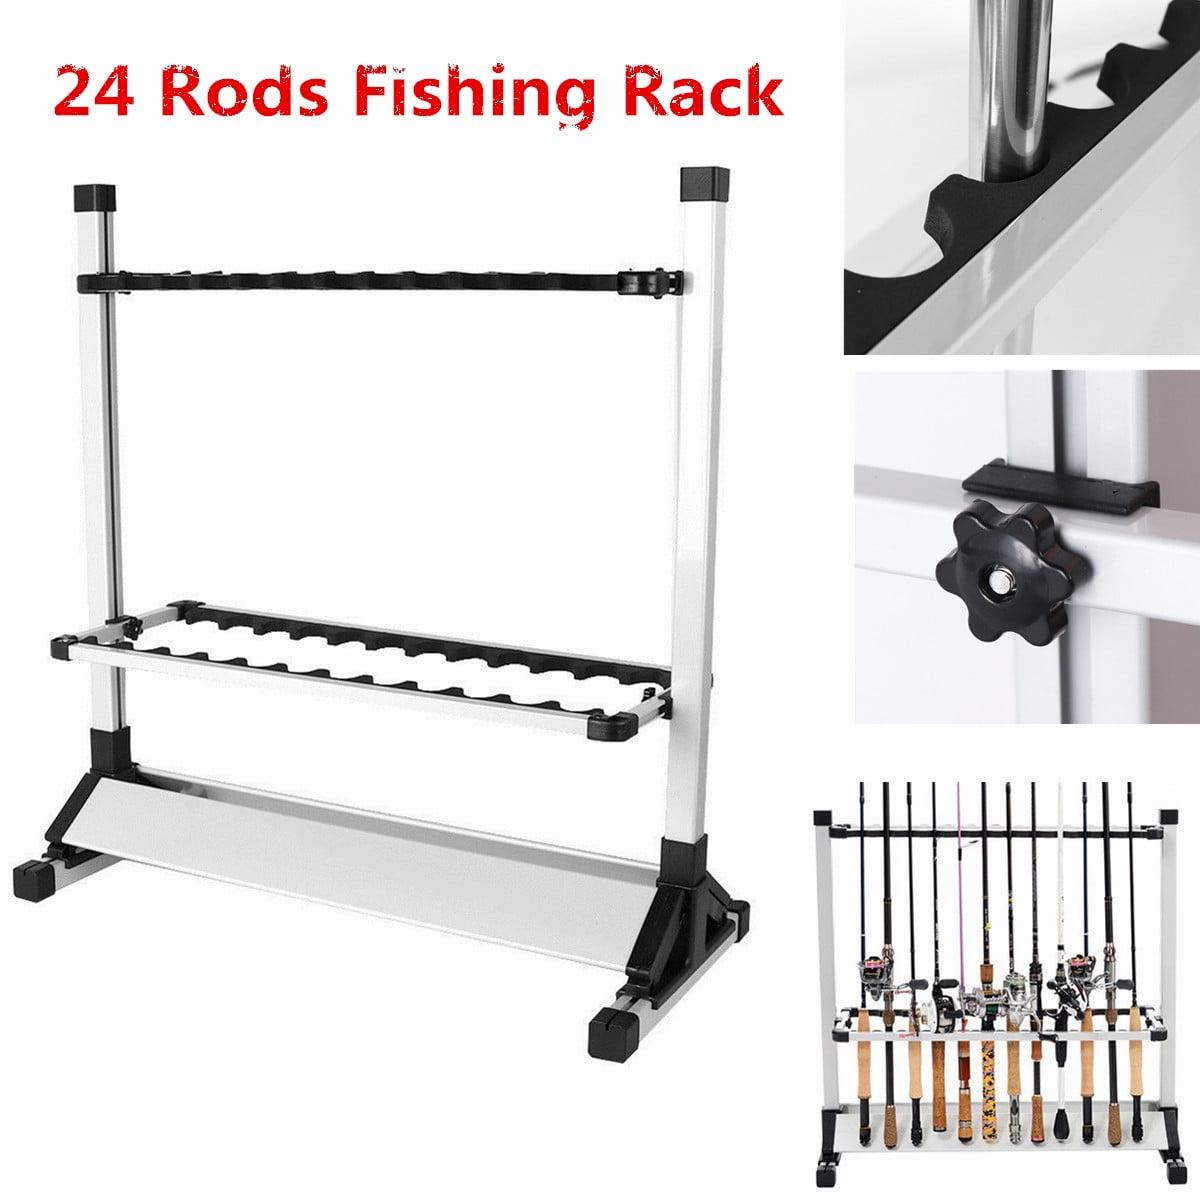 LineYDI Fishing Rod Rack, Fishing Rod Holder 24 Rods for Freshwater Fishing  Rods and Combos